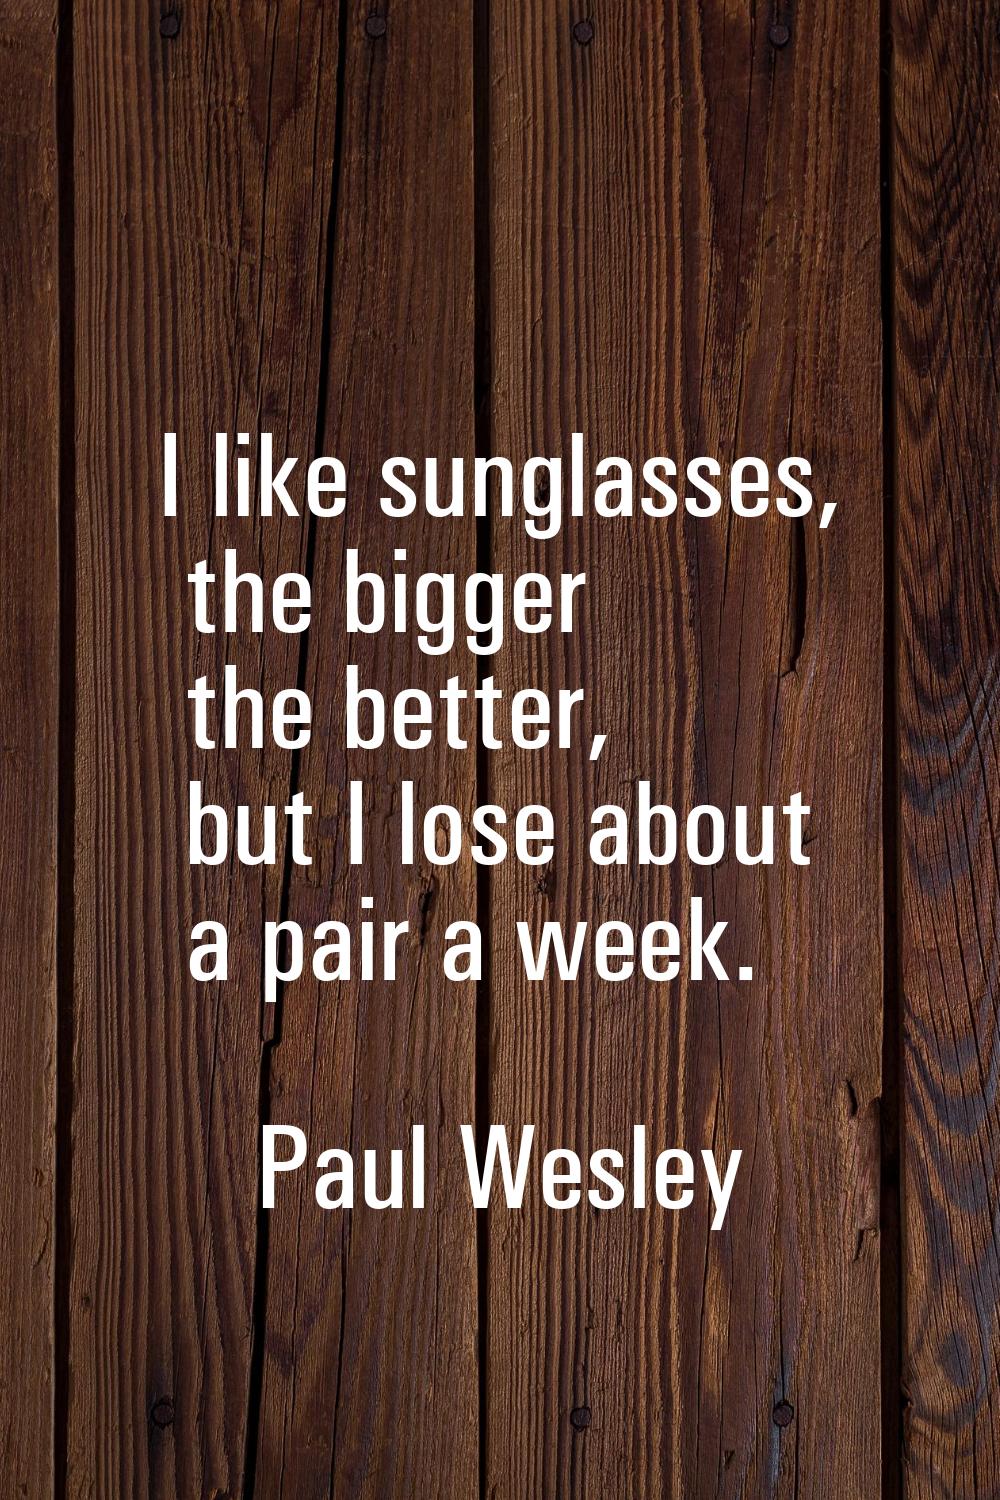 I like sunglasses, the bigger the better, but I lose about a pair a week.